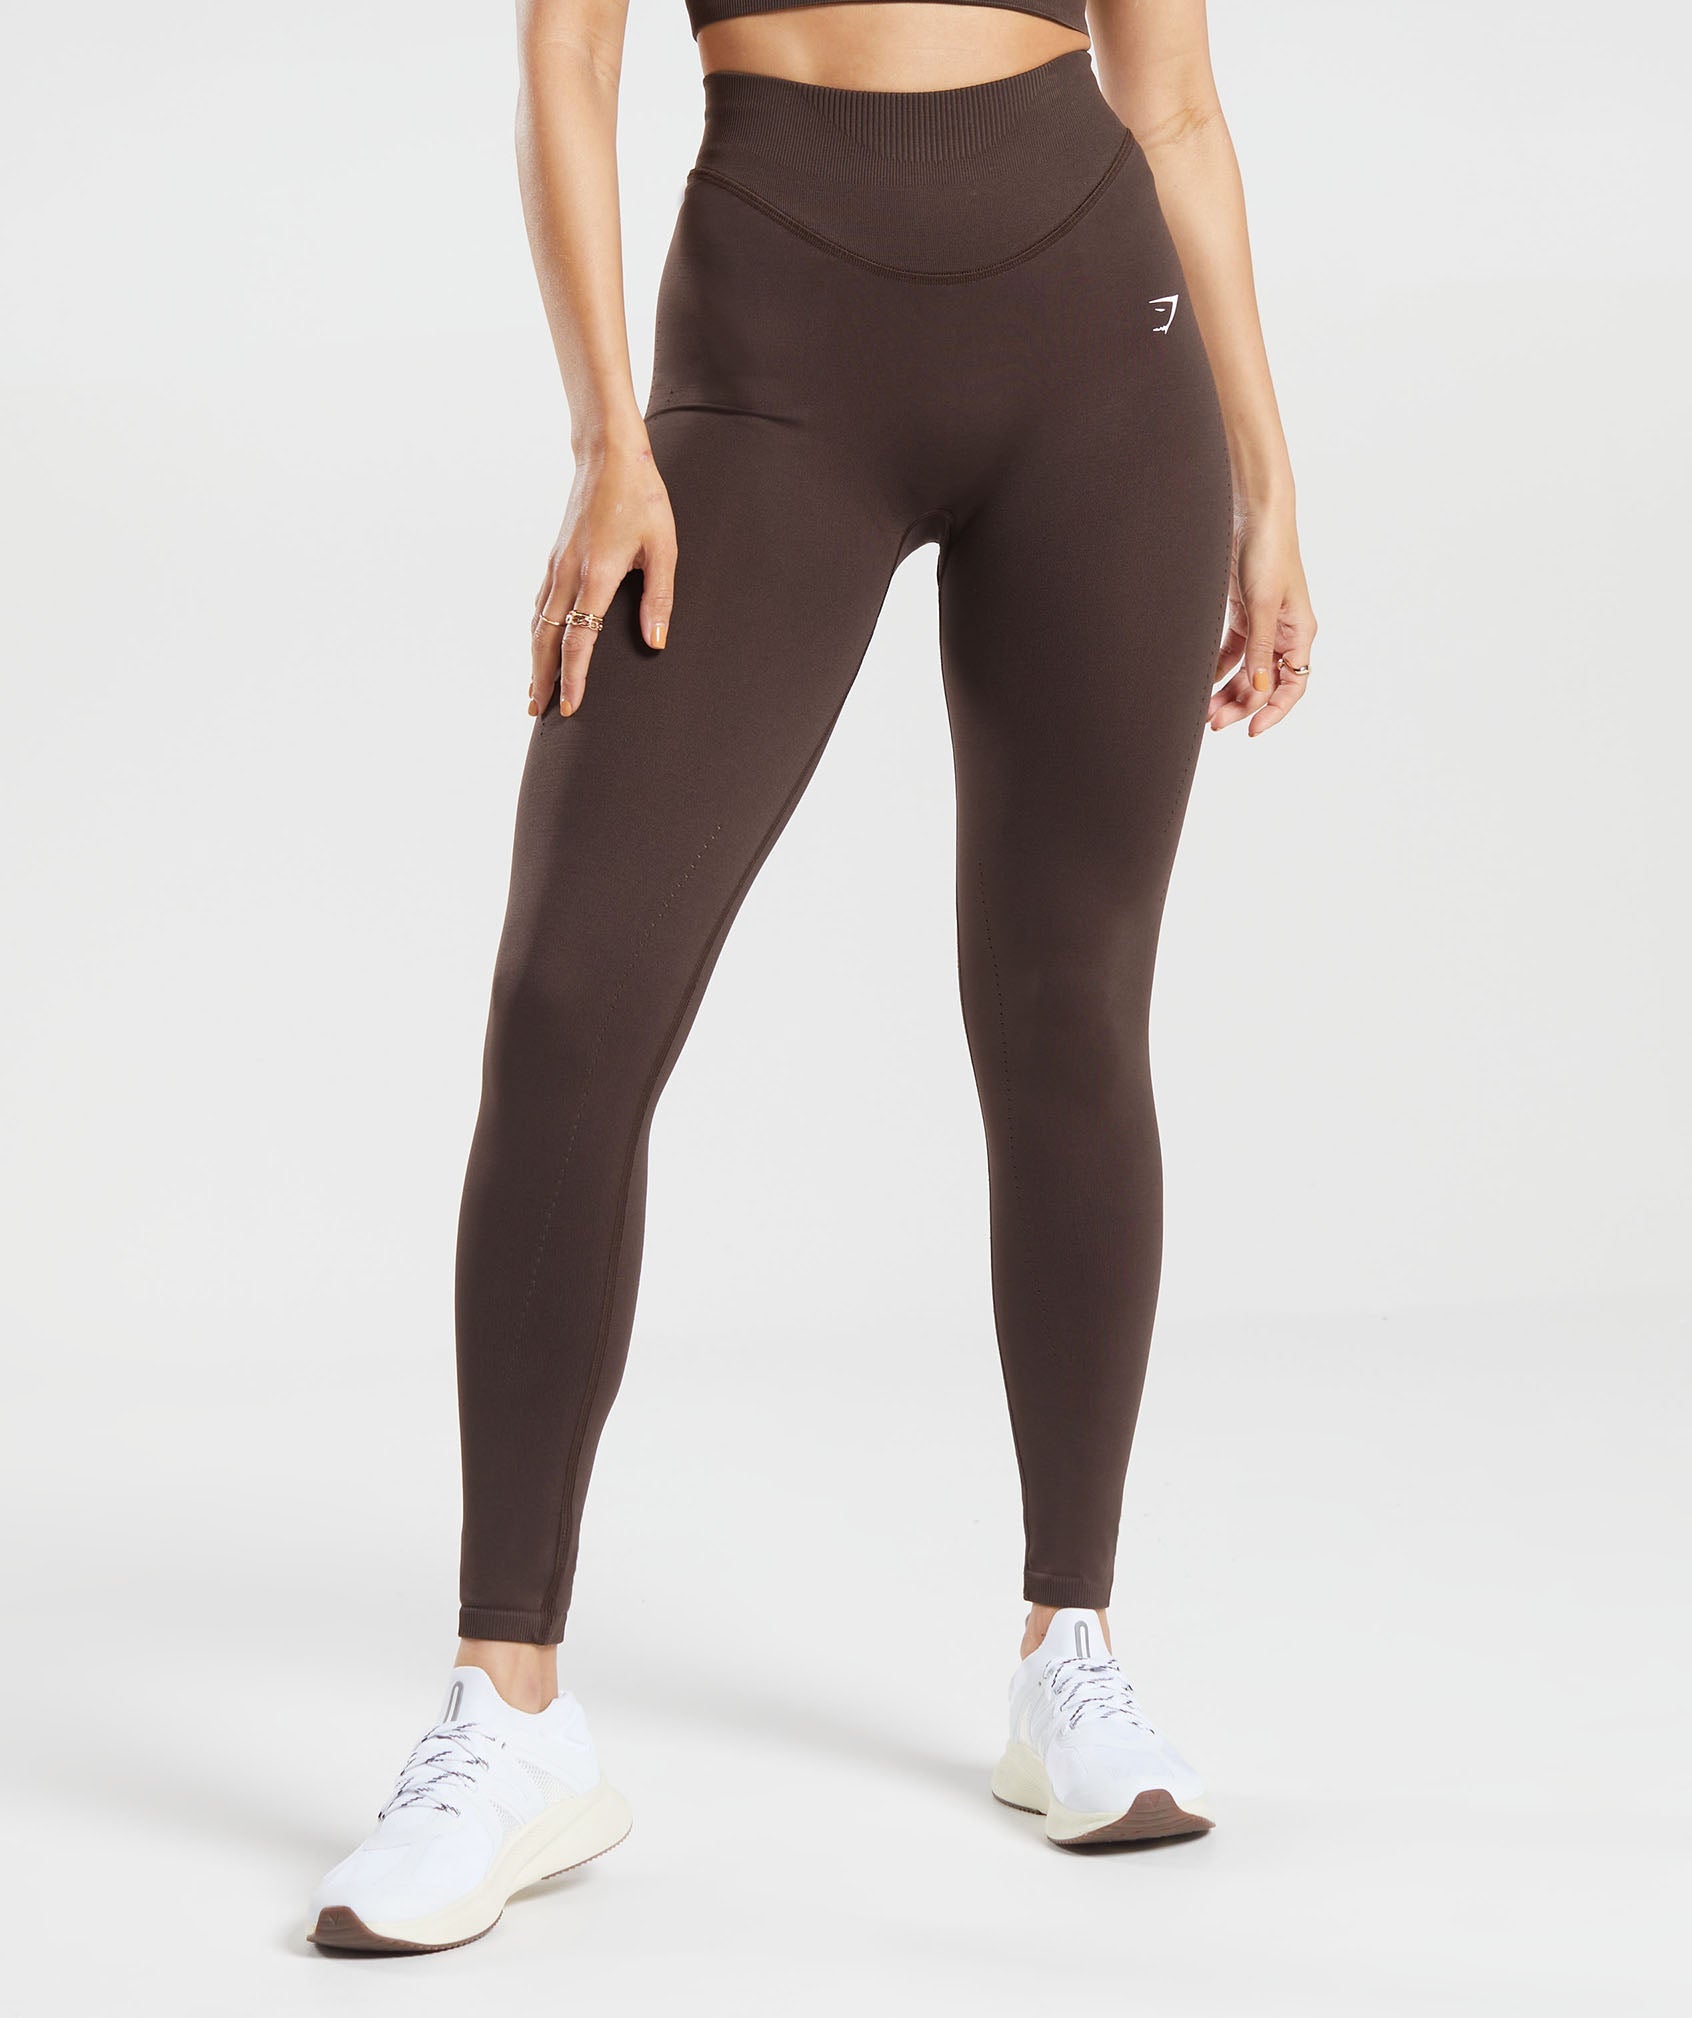 Pin by RLQ on Gymshark  Workout leggings, Workout clothes, Sport